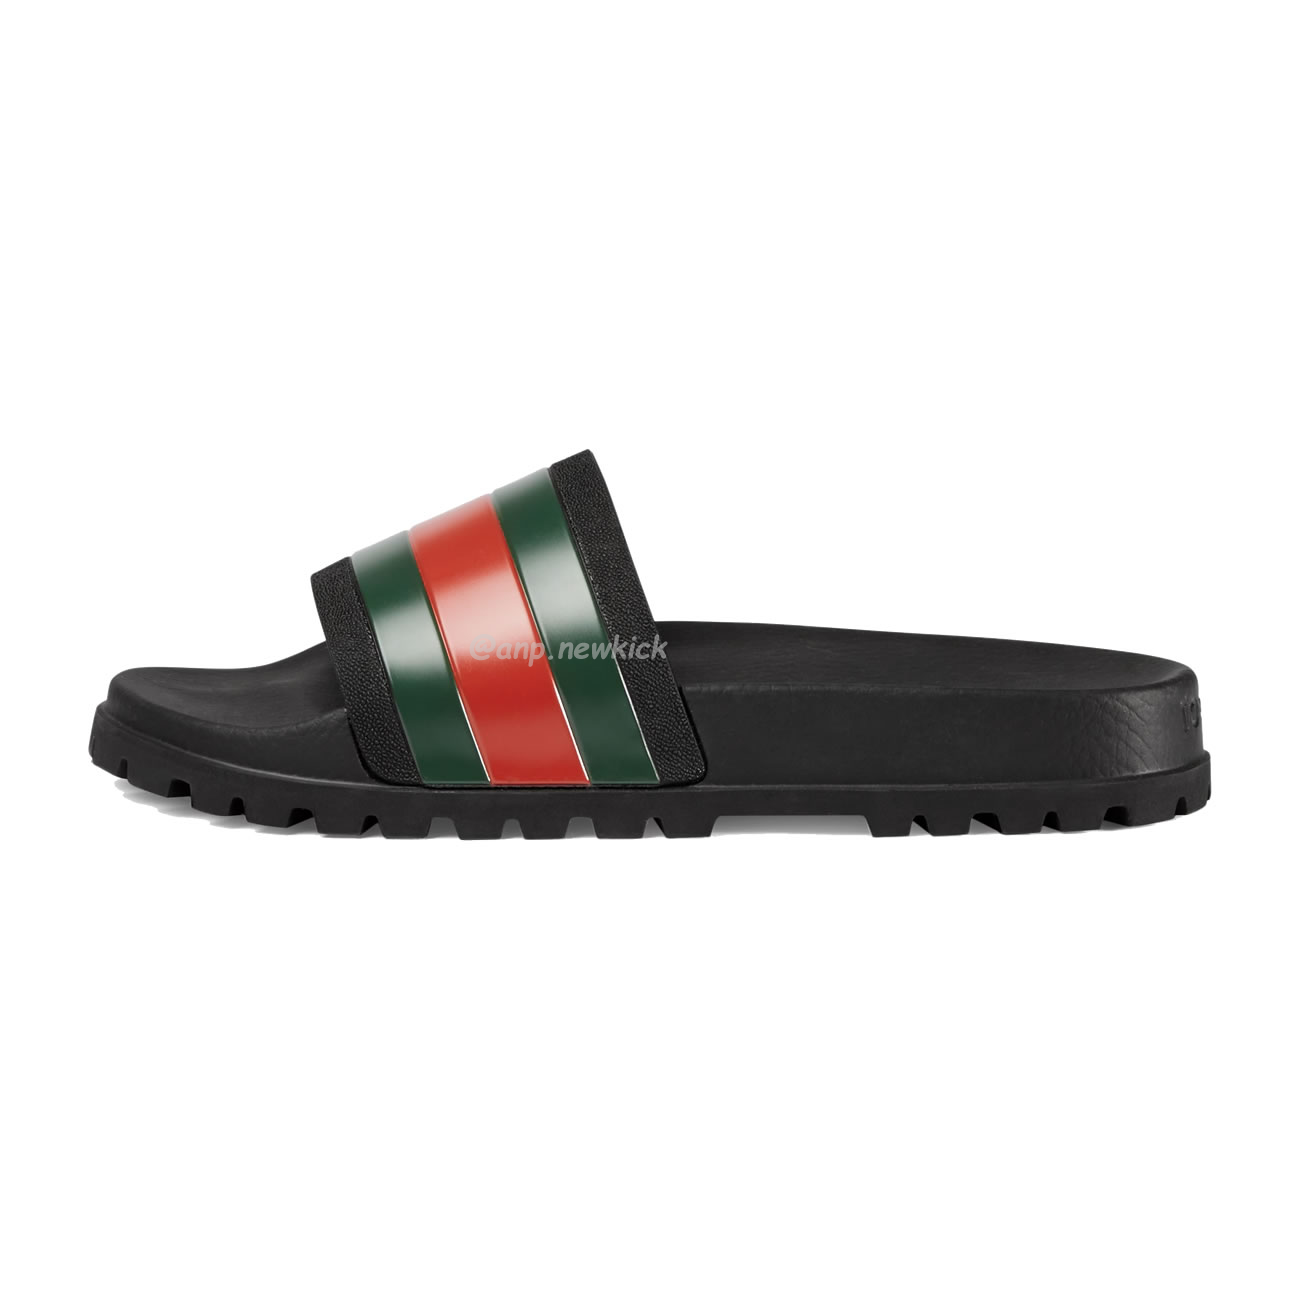 Gucci Mens Woven Leather Sandals 429469 Gib10 1098 (1) - newkick.org